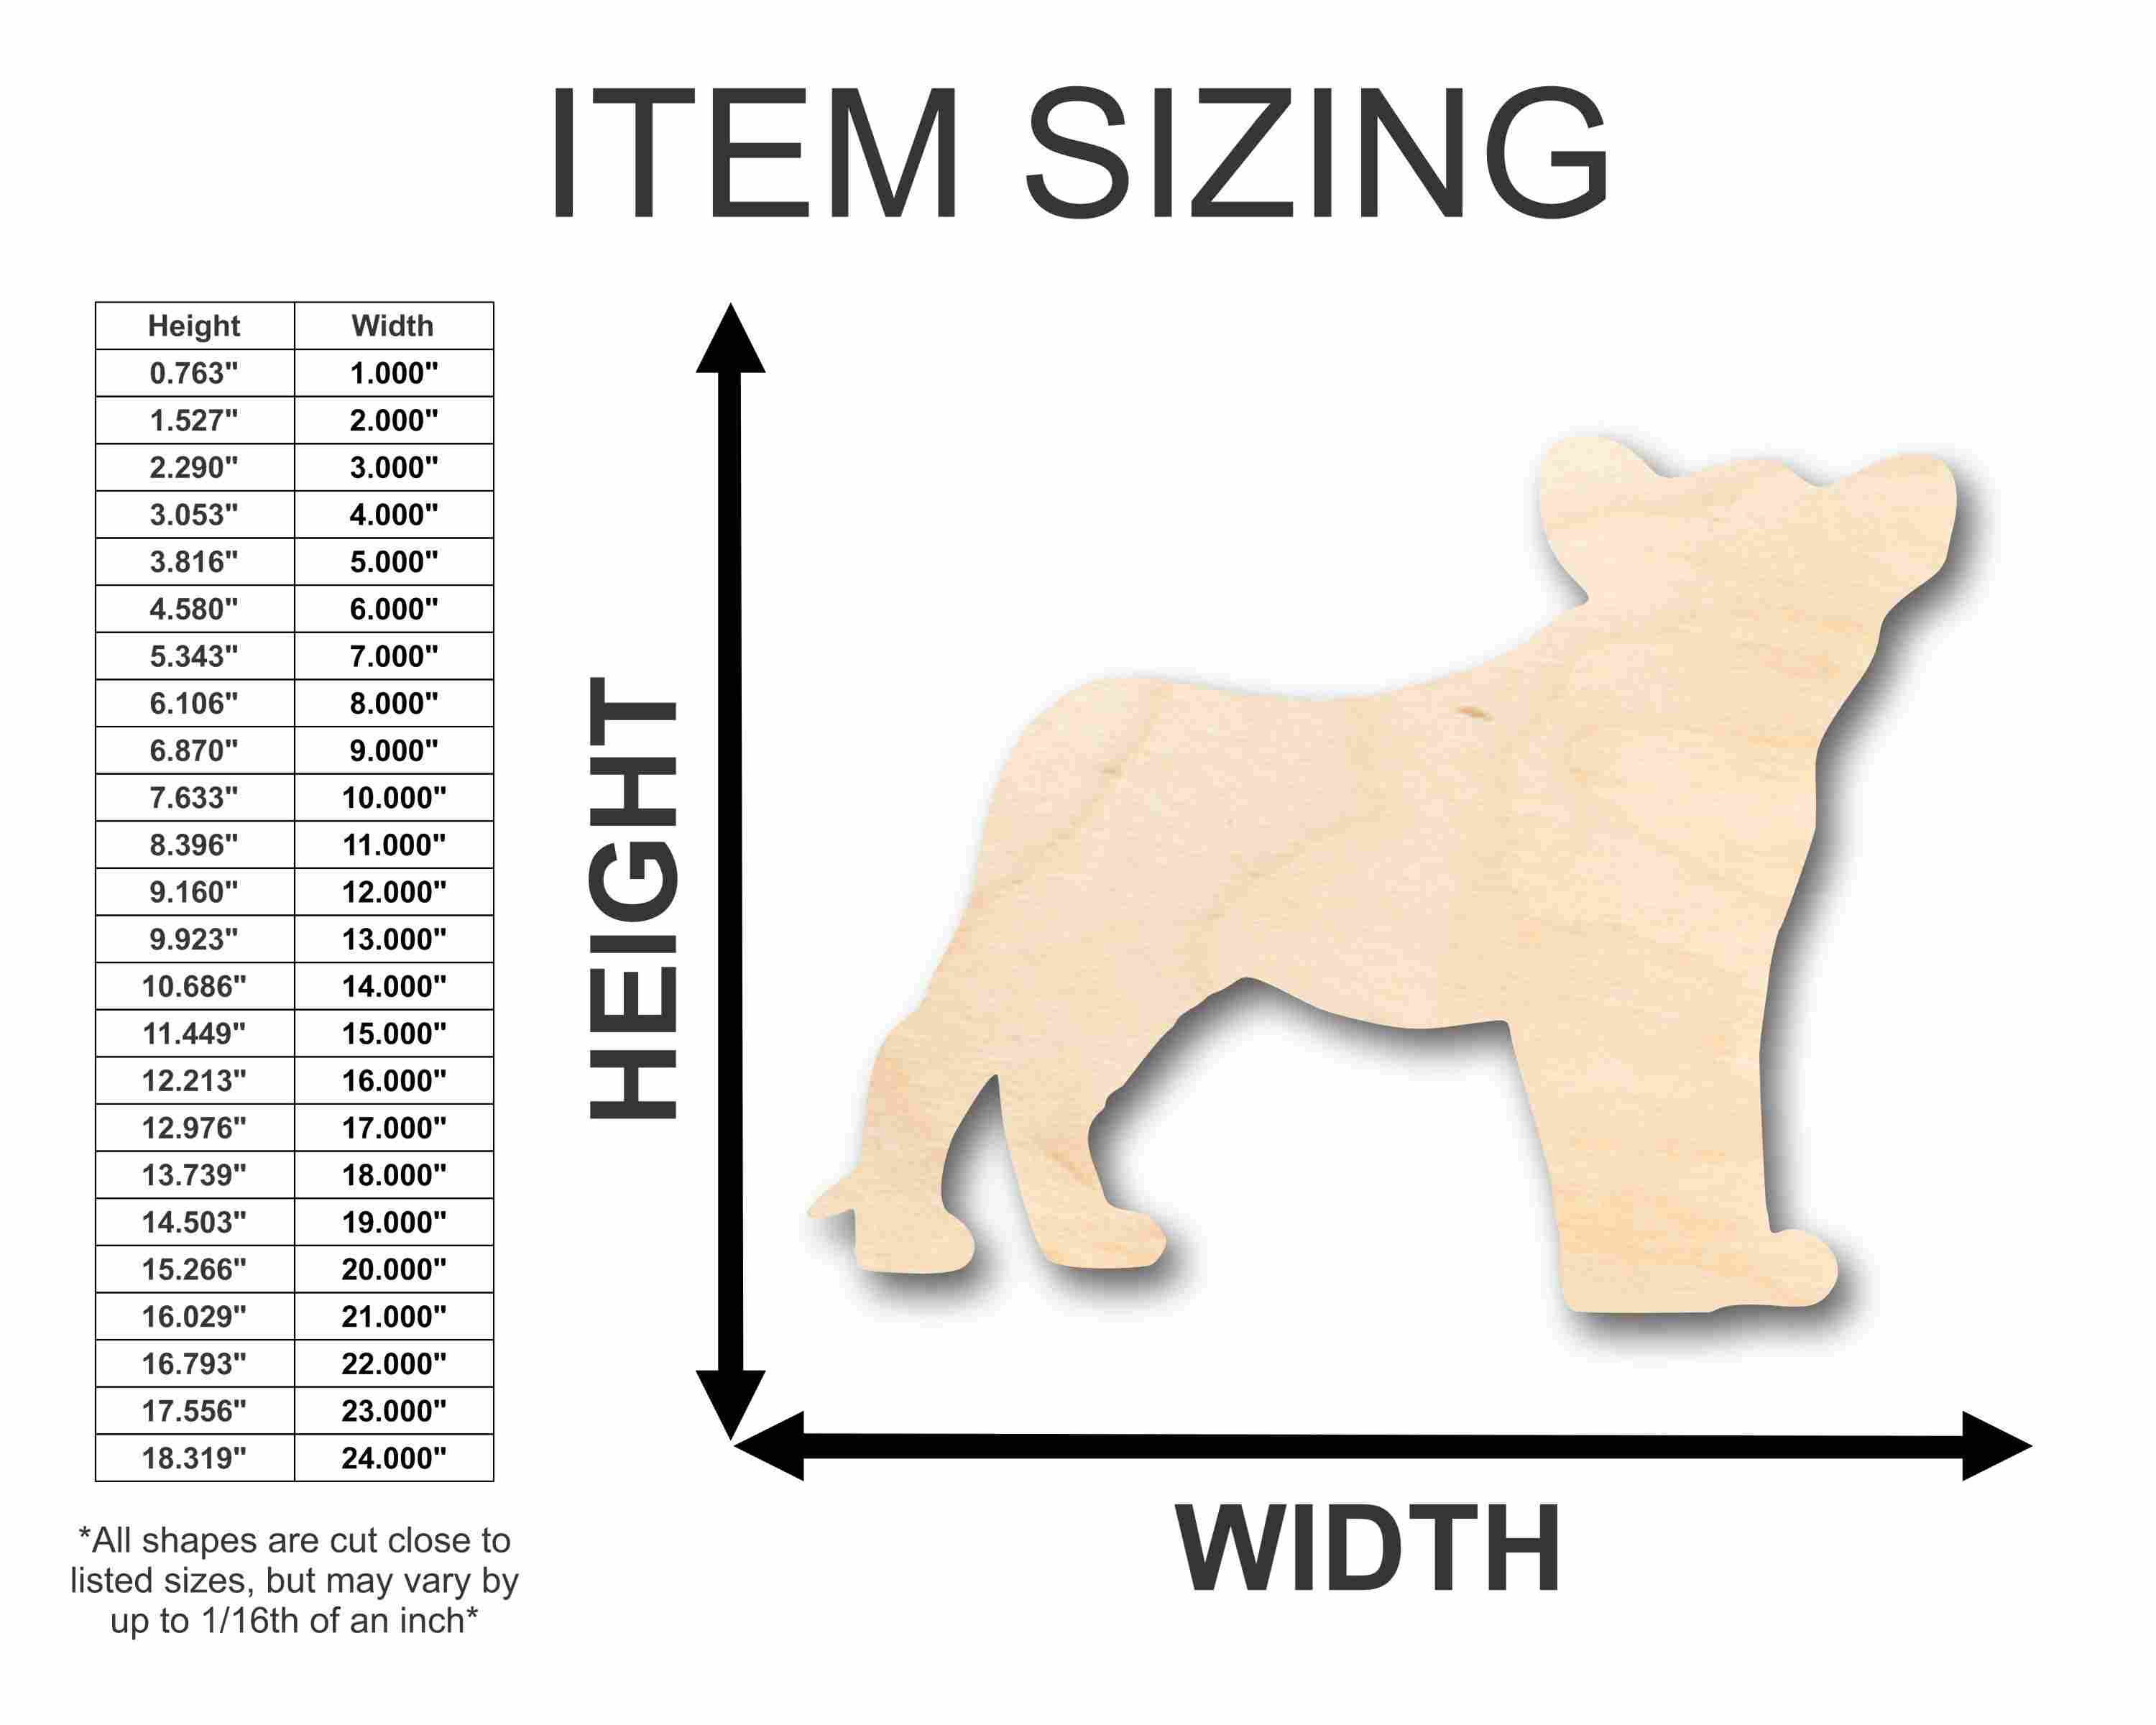 Unfinished Wood Lion Silhouette - Craft- up to 24